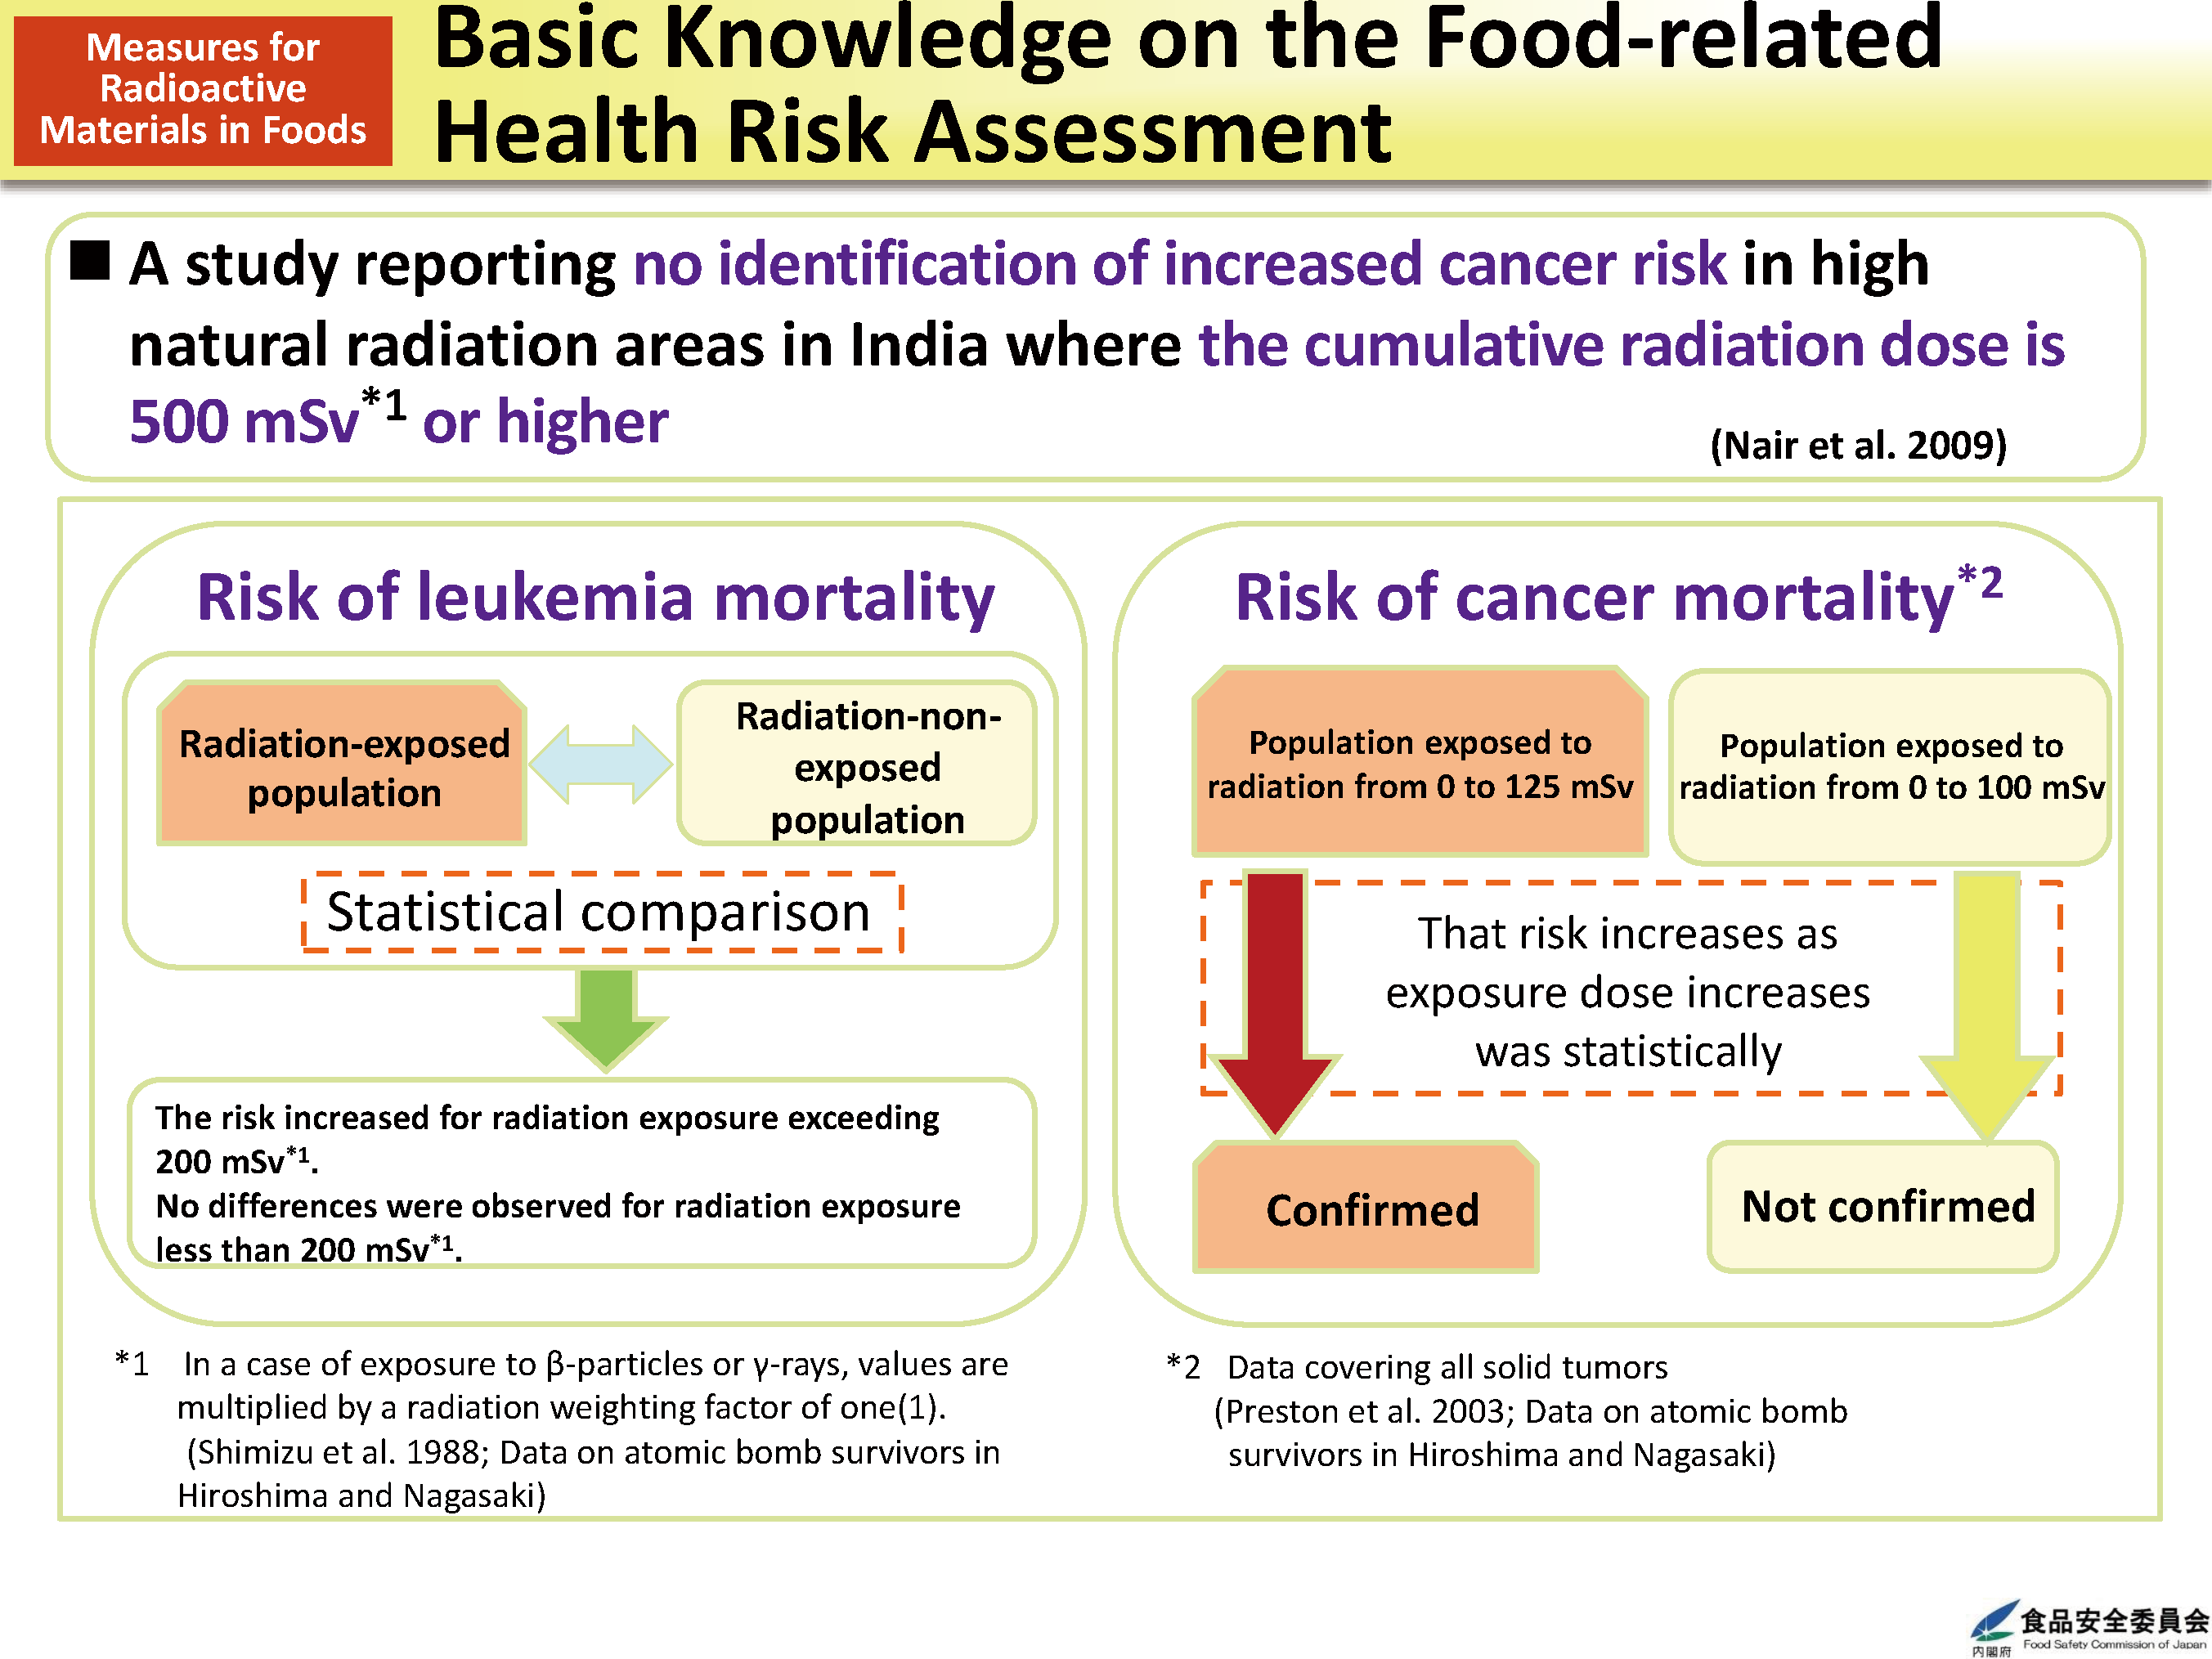 Basic Knowledge on the Food-related Health Risk Assessment_Figure